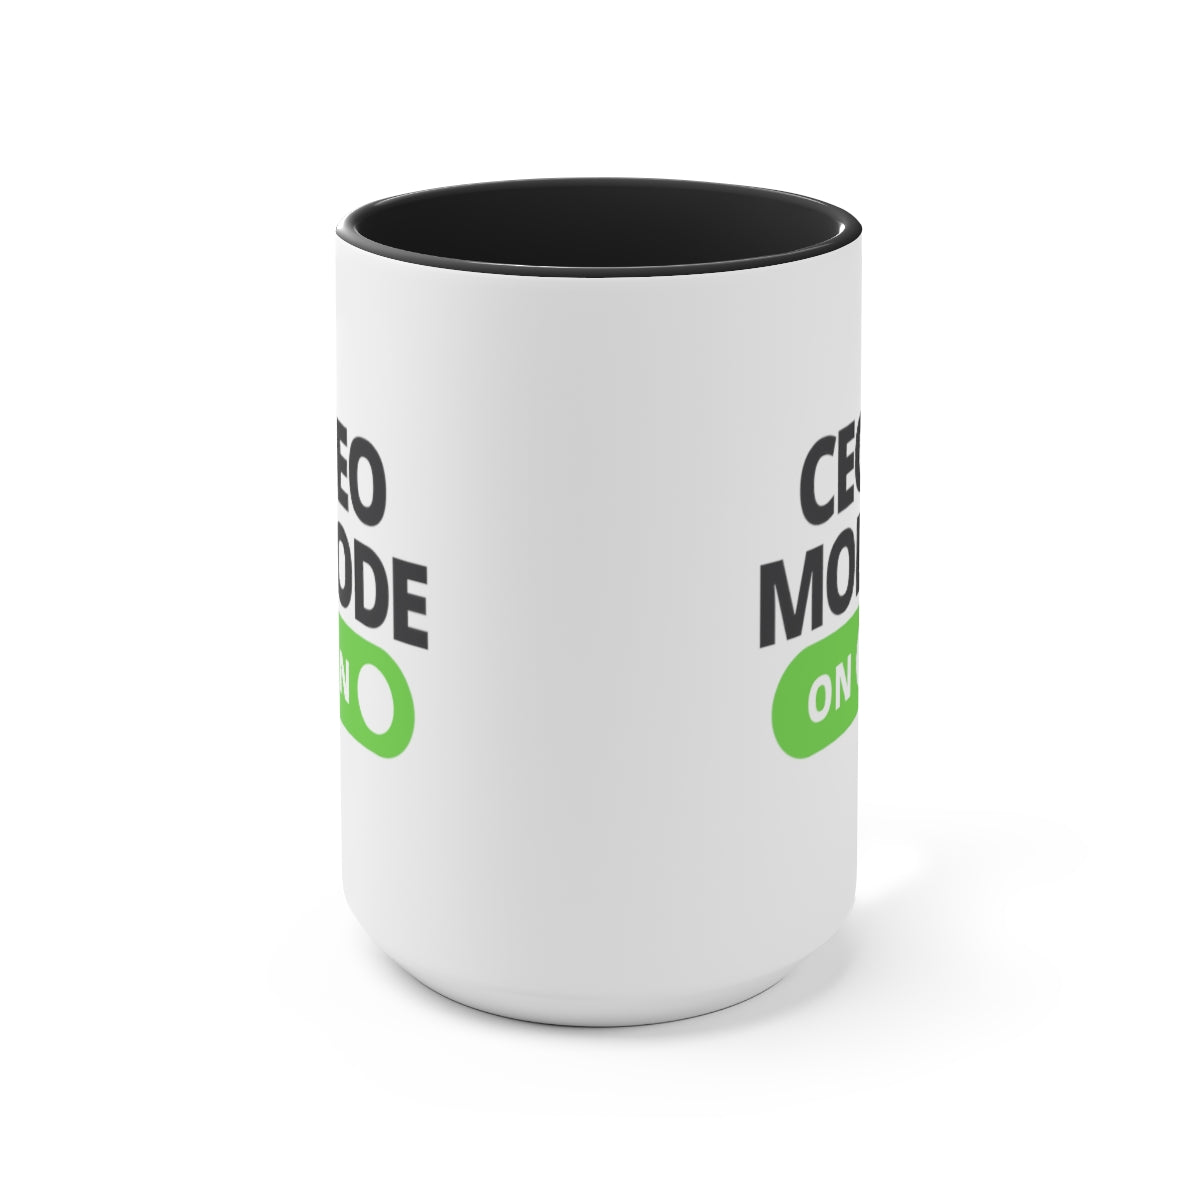 CEO Mode On Coffee Mug | Ceo Tea Mug | Mugs for the Boss | Gifts for Ceo |  Business Owner Gifts | Mugs Business Owner